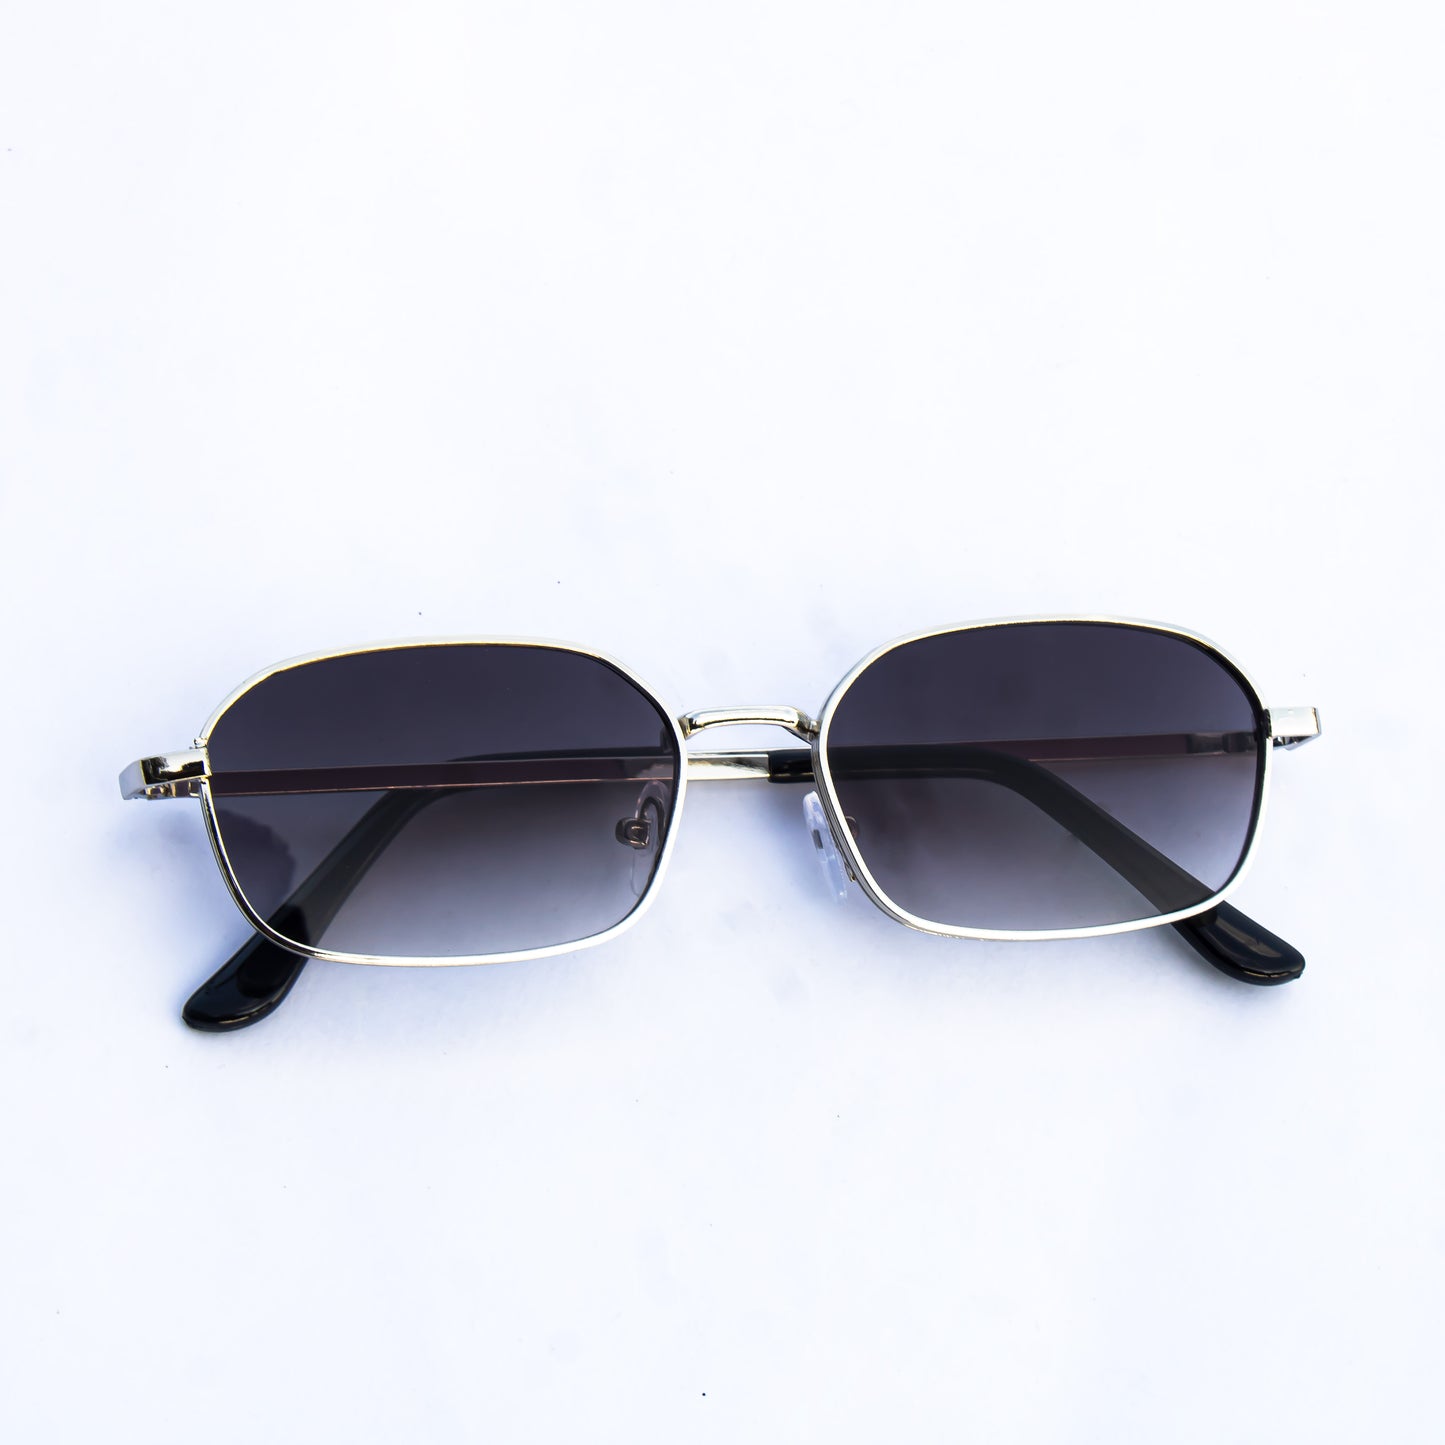 Jiebo Retro Square Sunglasses for Timeless Style